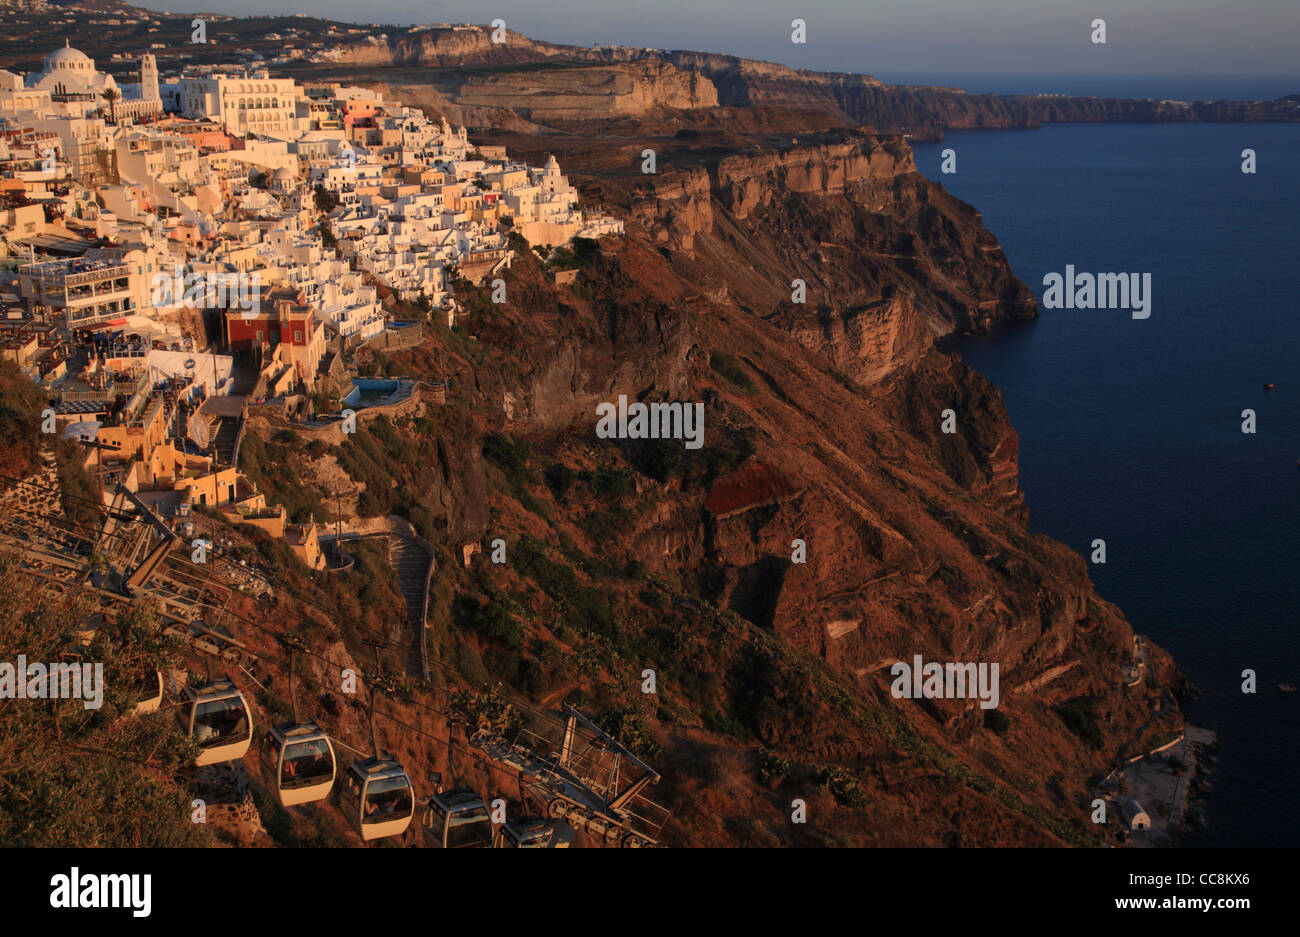 The caldera at Thira, Santorini, Cyclades Islands, Greece at Sunset (dusk). Cable car in foreground Stock Photo